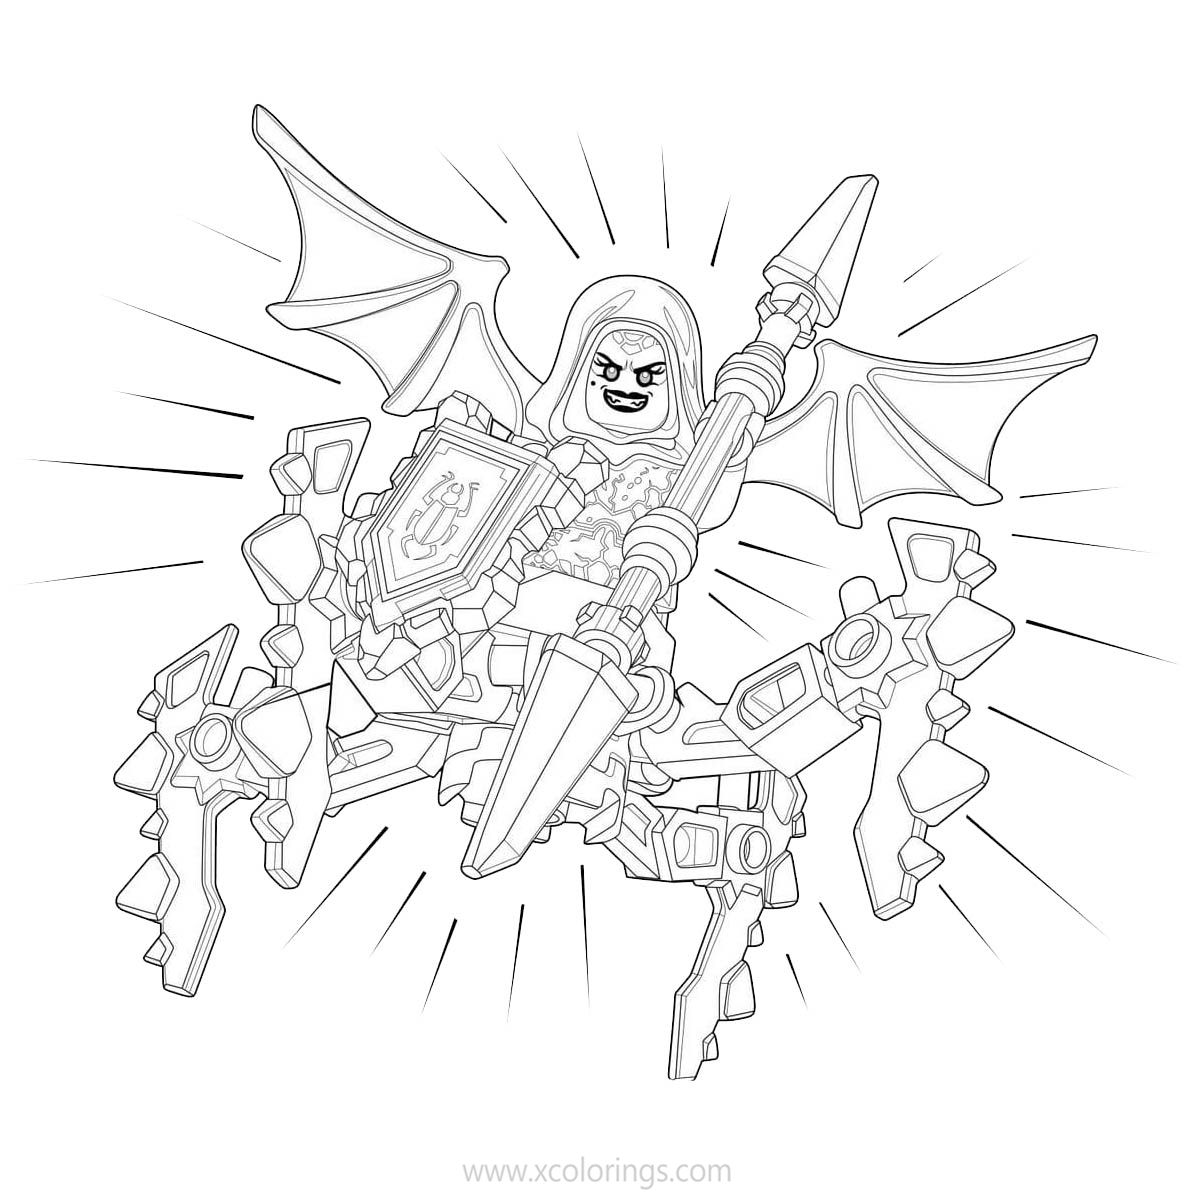 Free LEGO NEXO Knights Coloring Pages for Kids printable